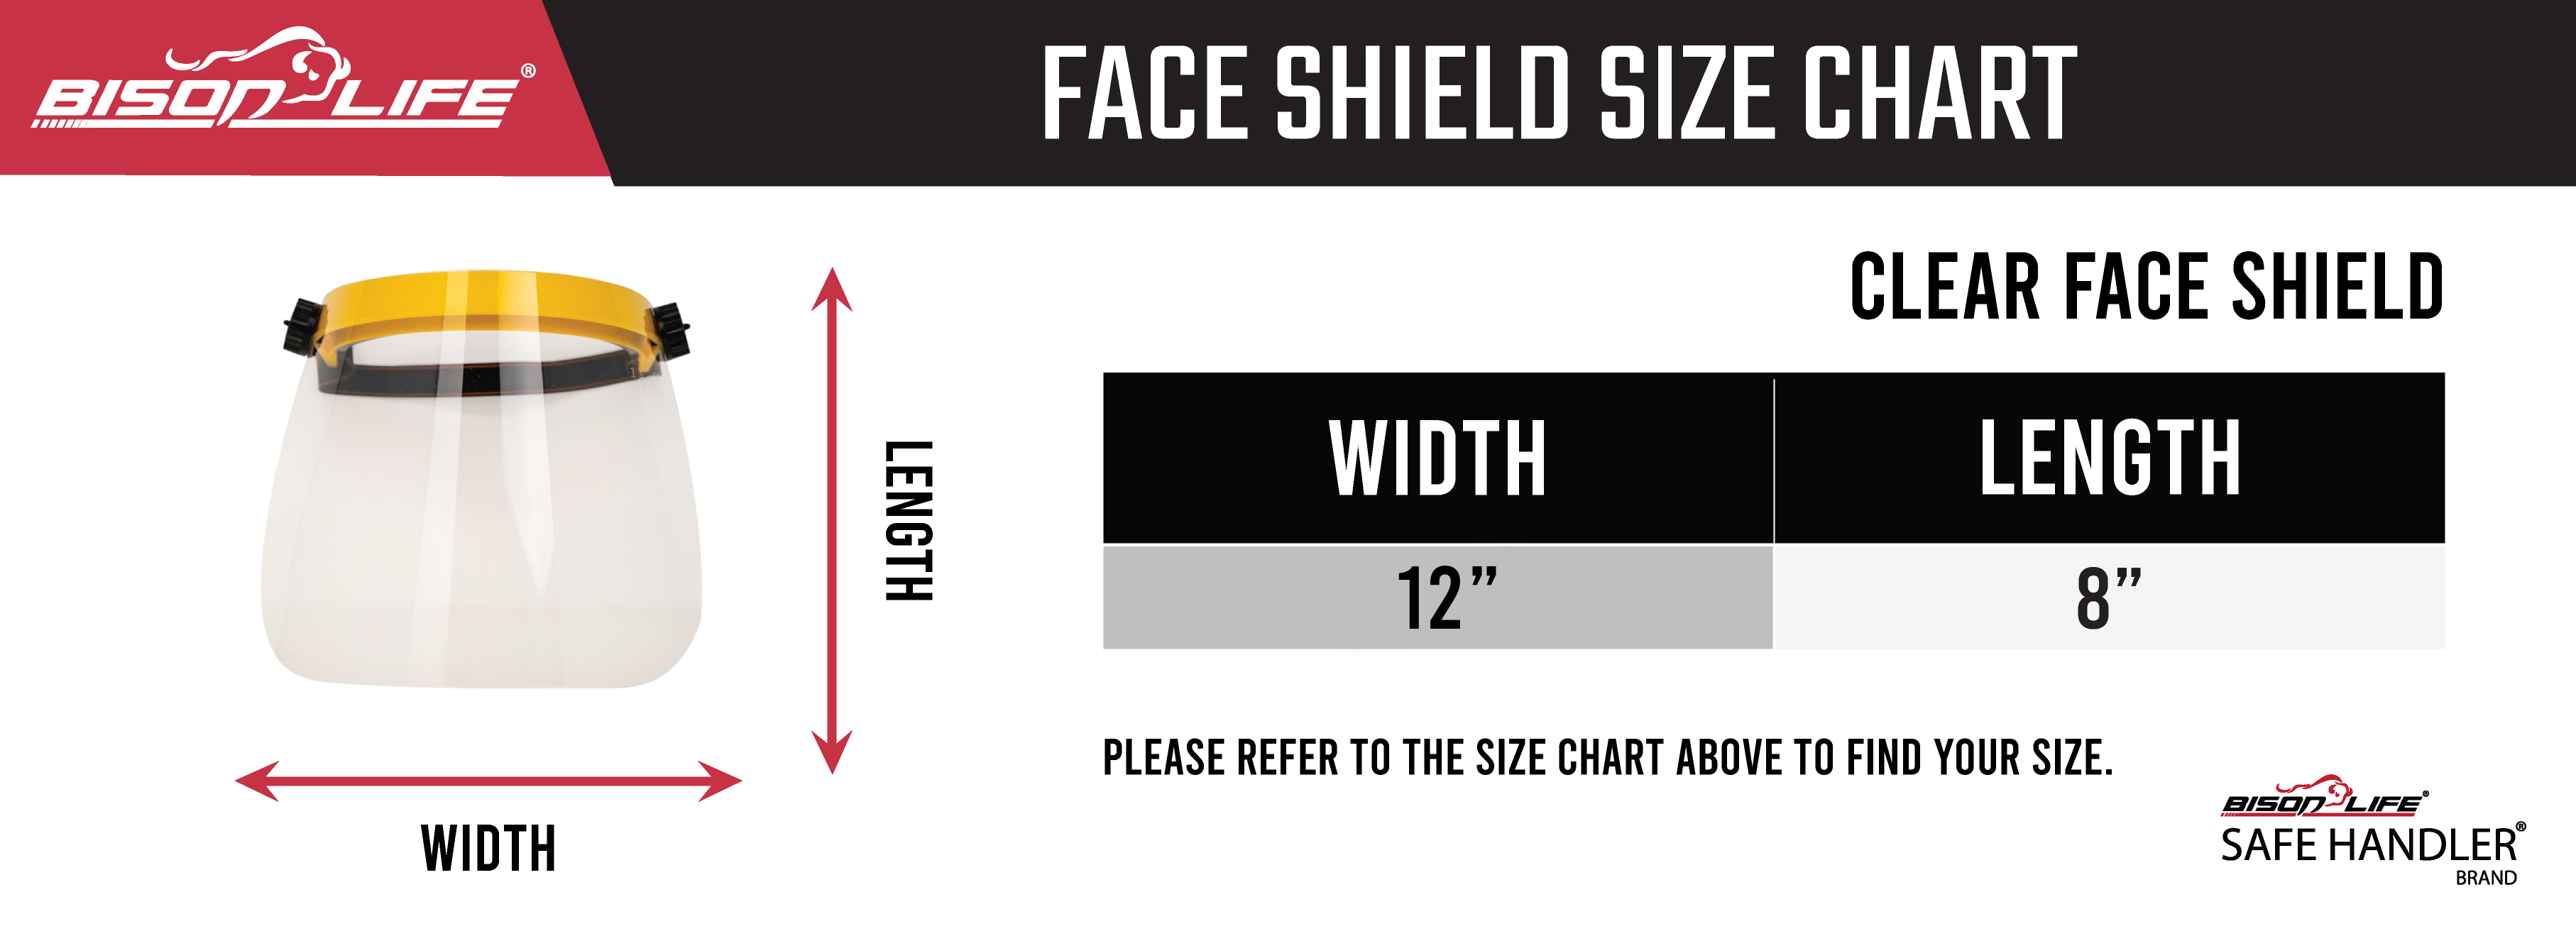 Clear Face Shield Size Chart